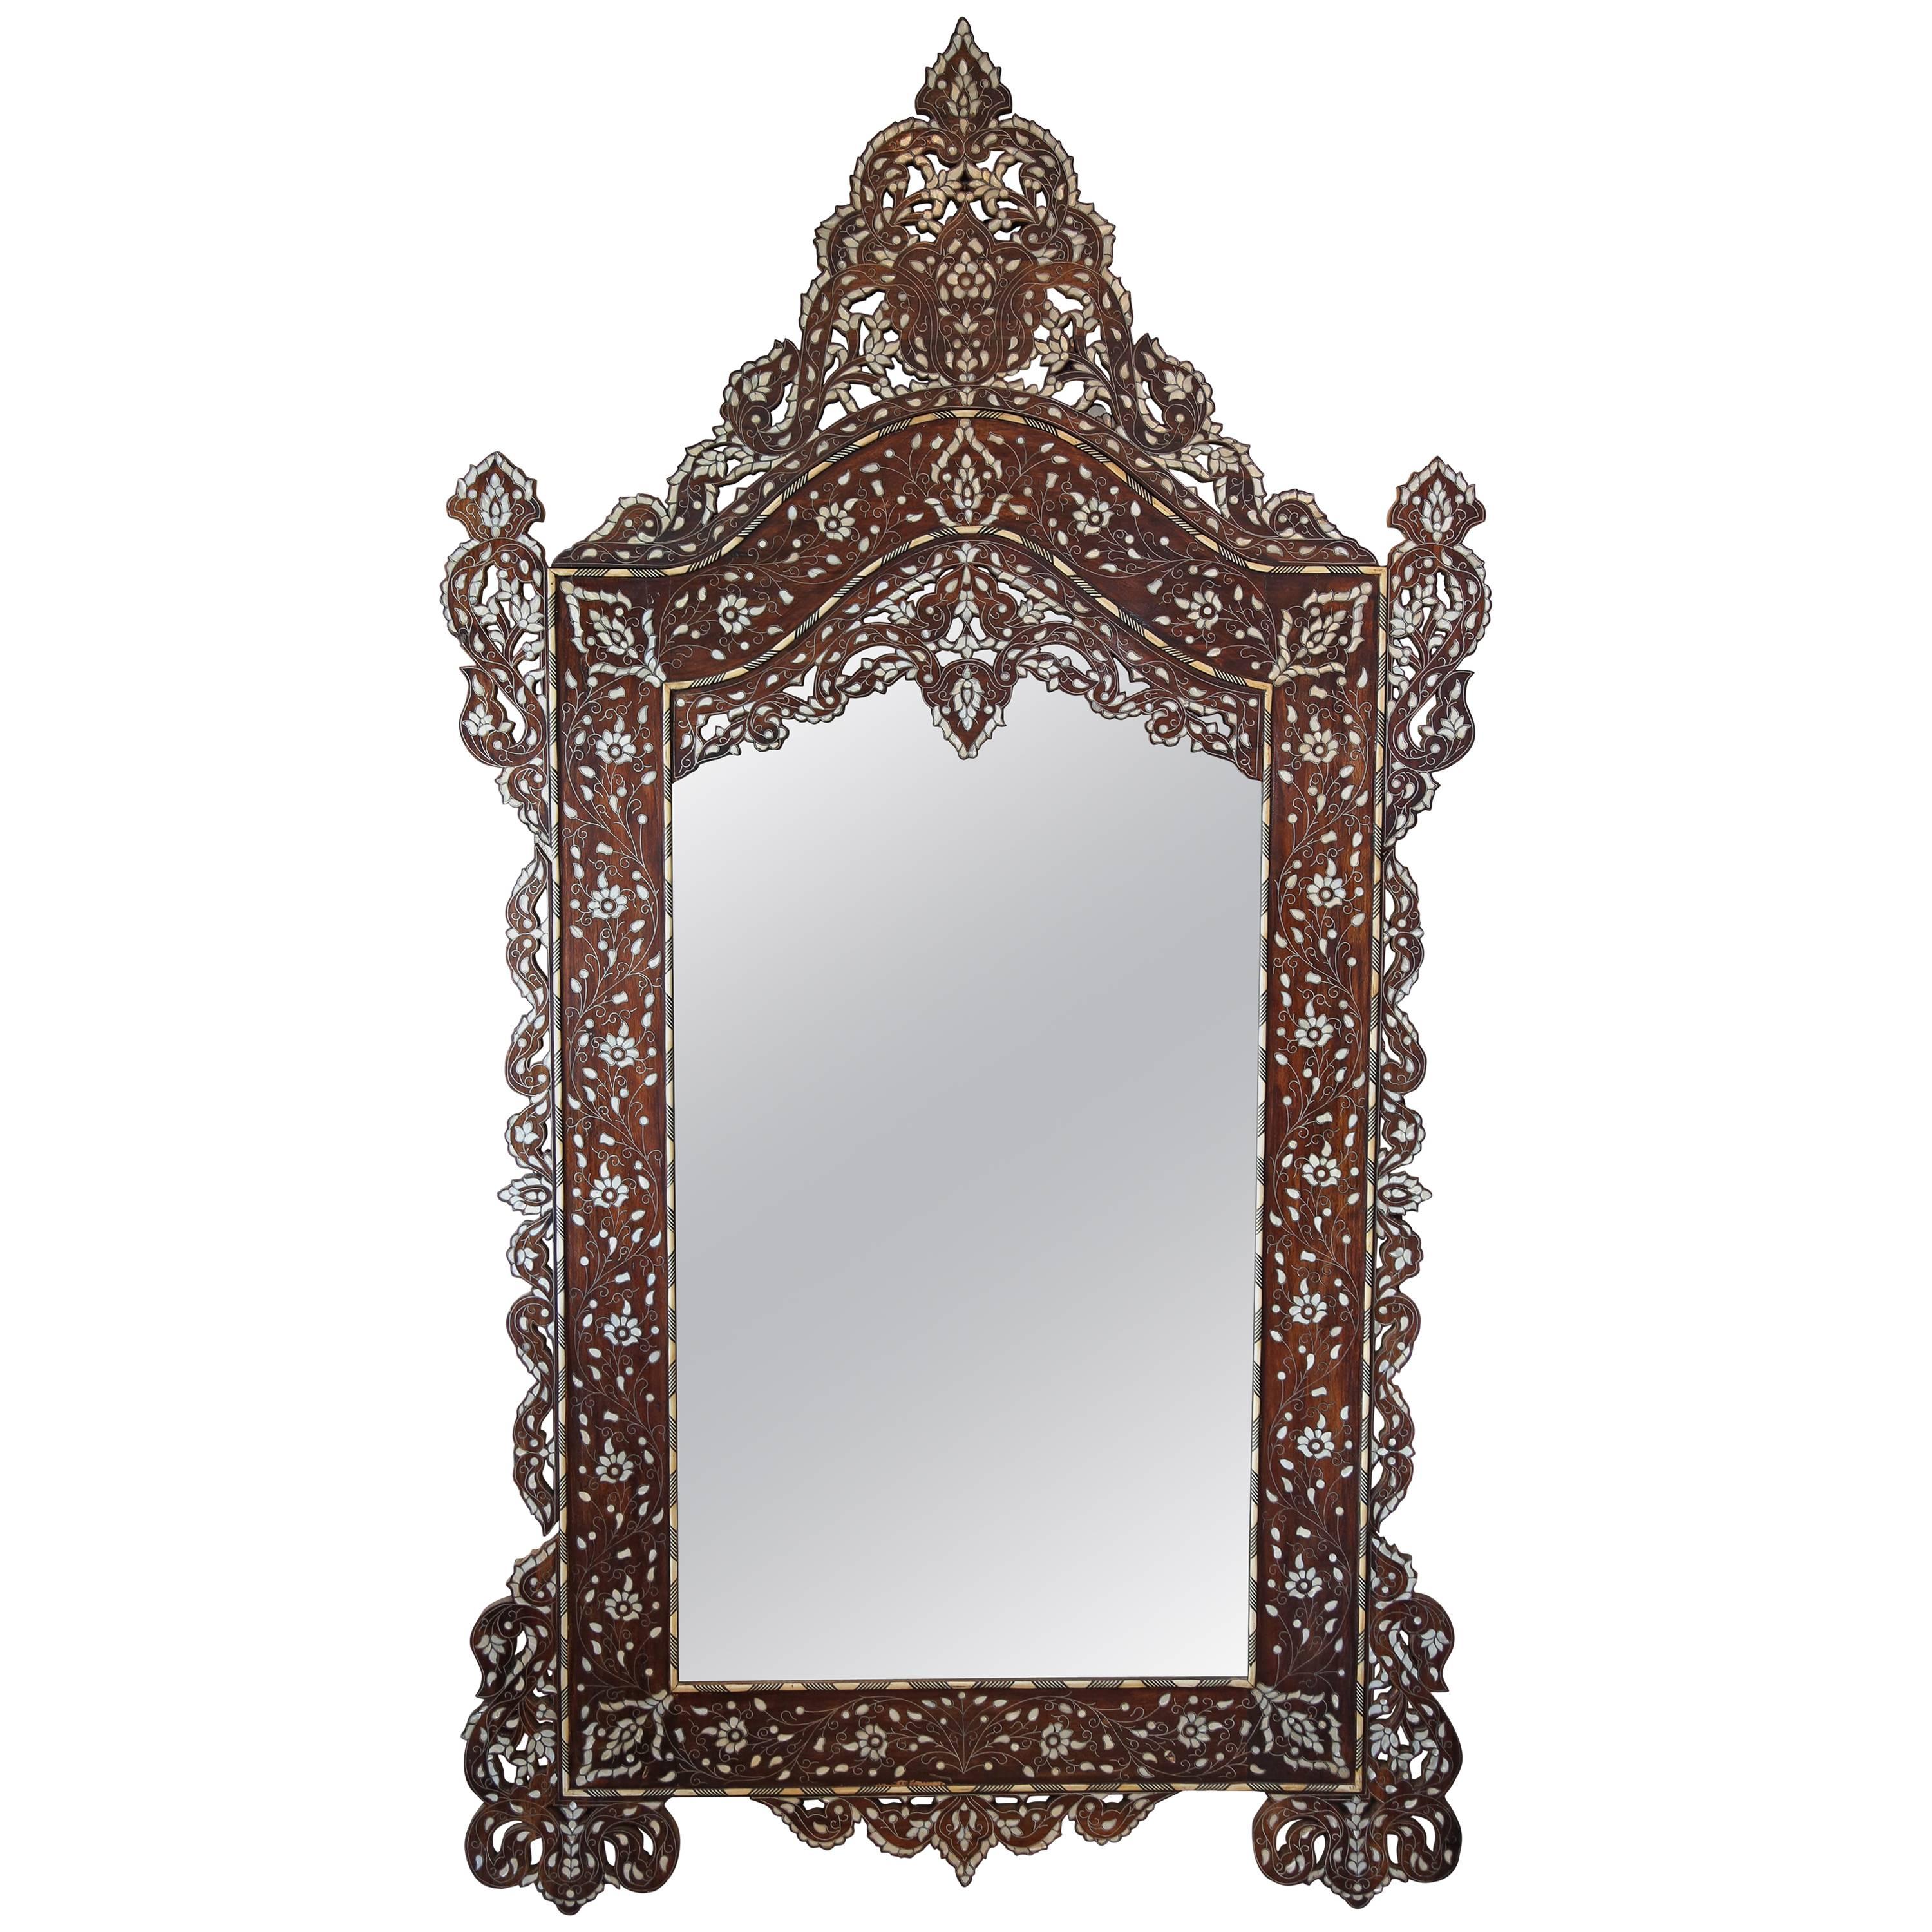 Gorgeous 1900s Syrian Mirror Inlaid with Mother-of-Pearl and Camel Bone